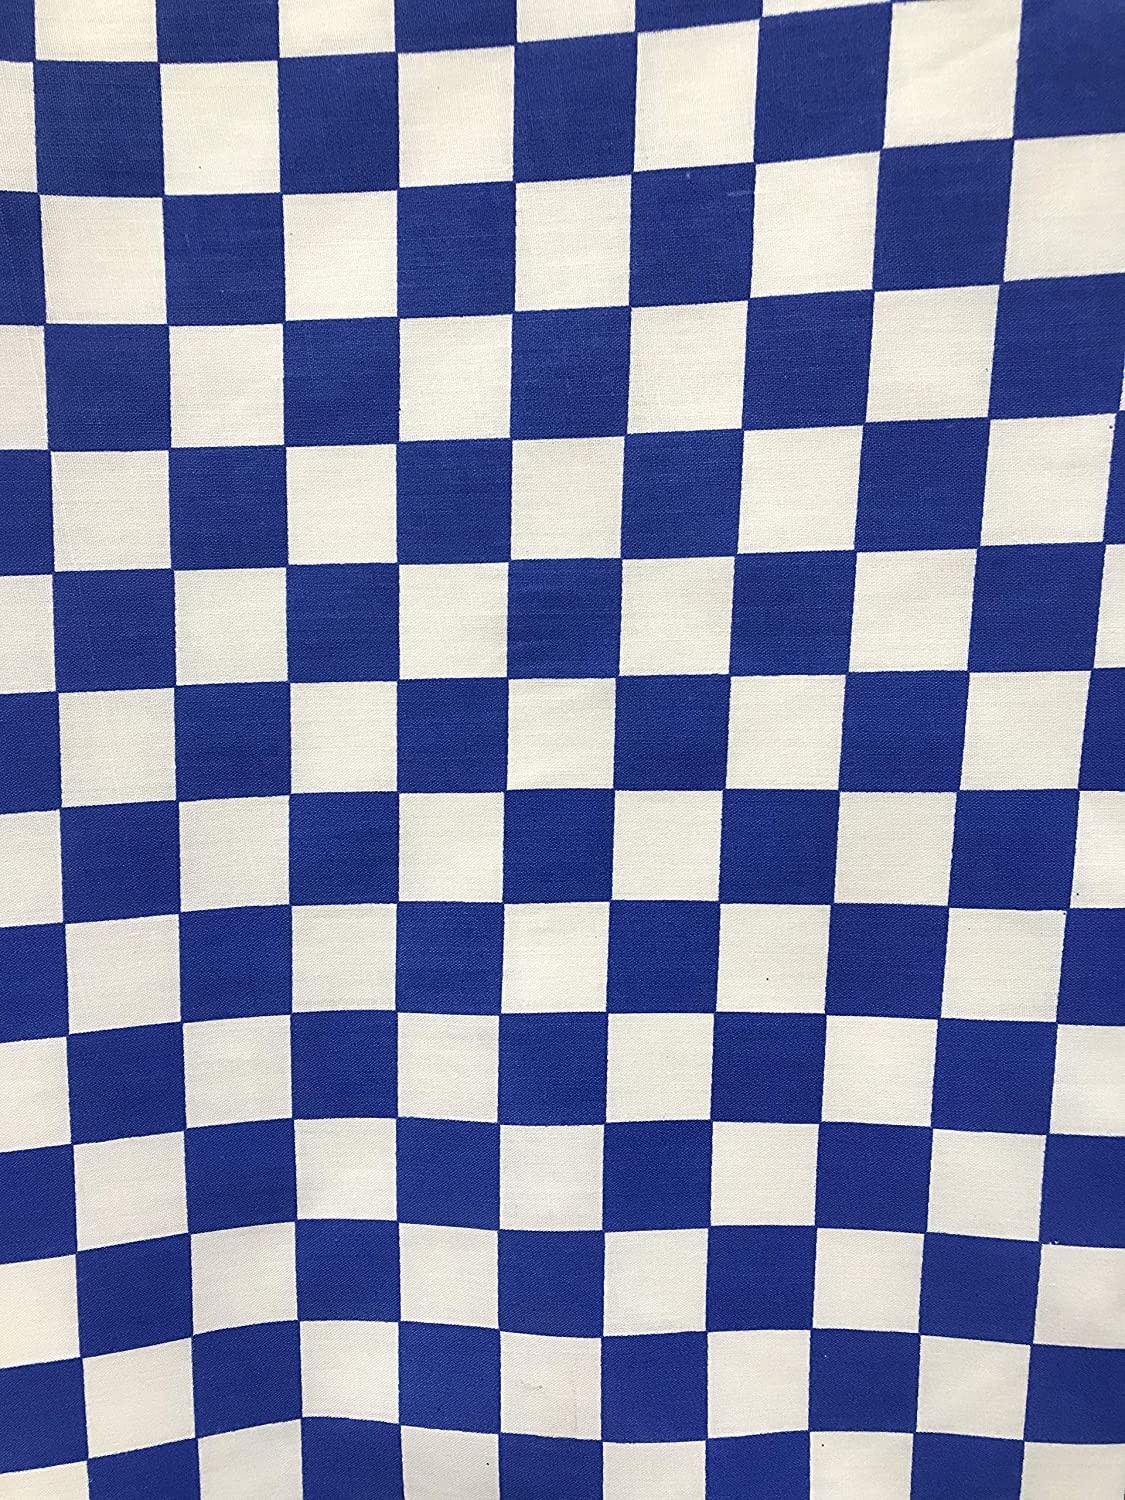 60" Wide Checkered Poly Cotton Fabric - Sold By The Yard, White & Royal